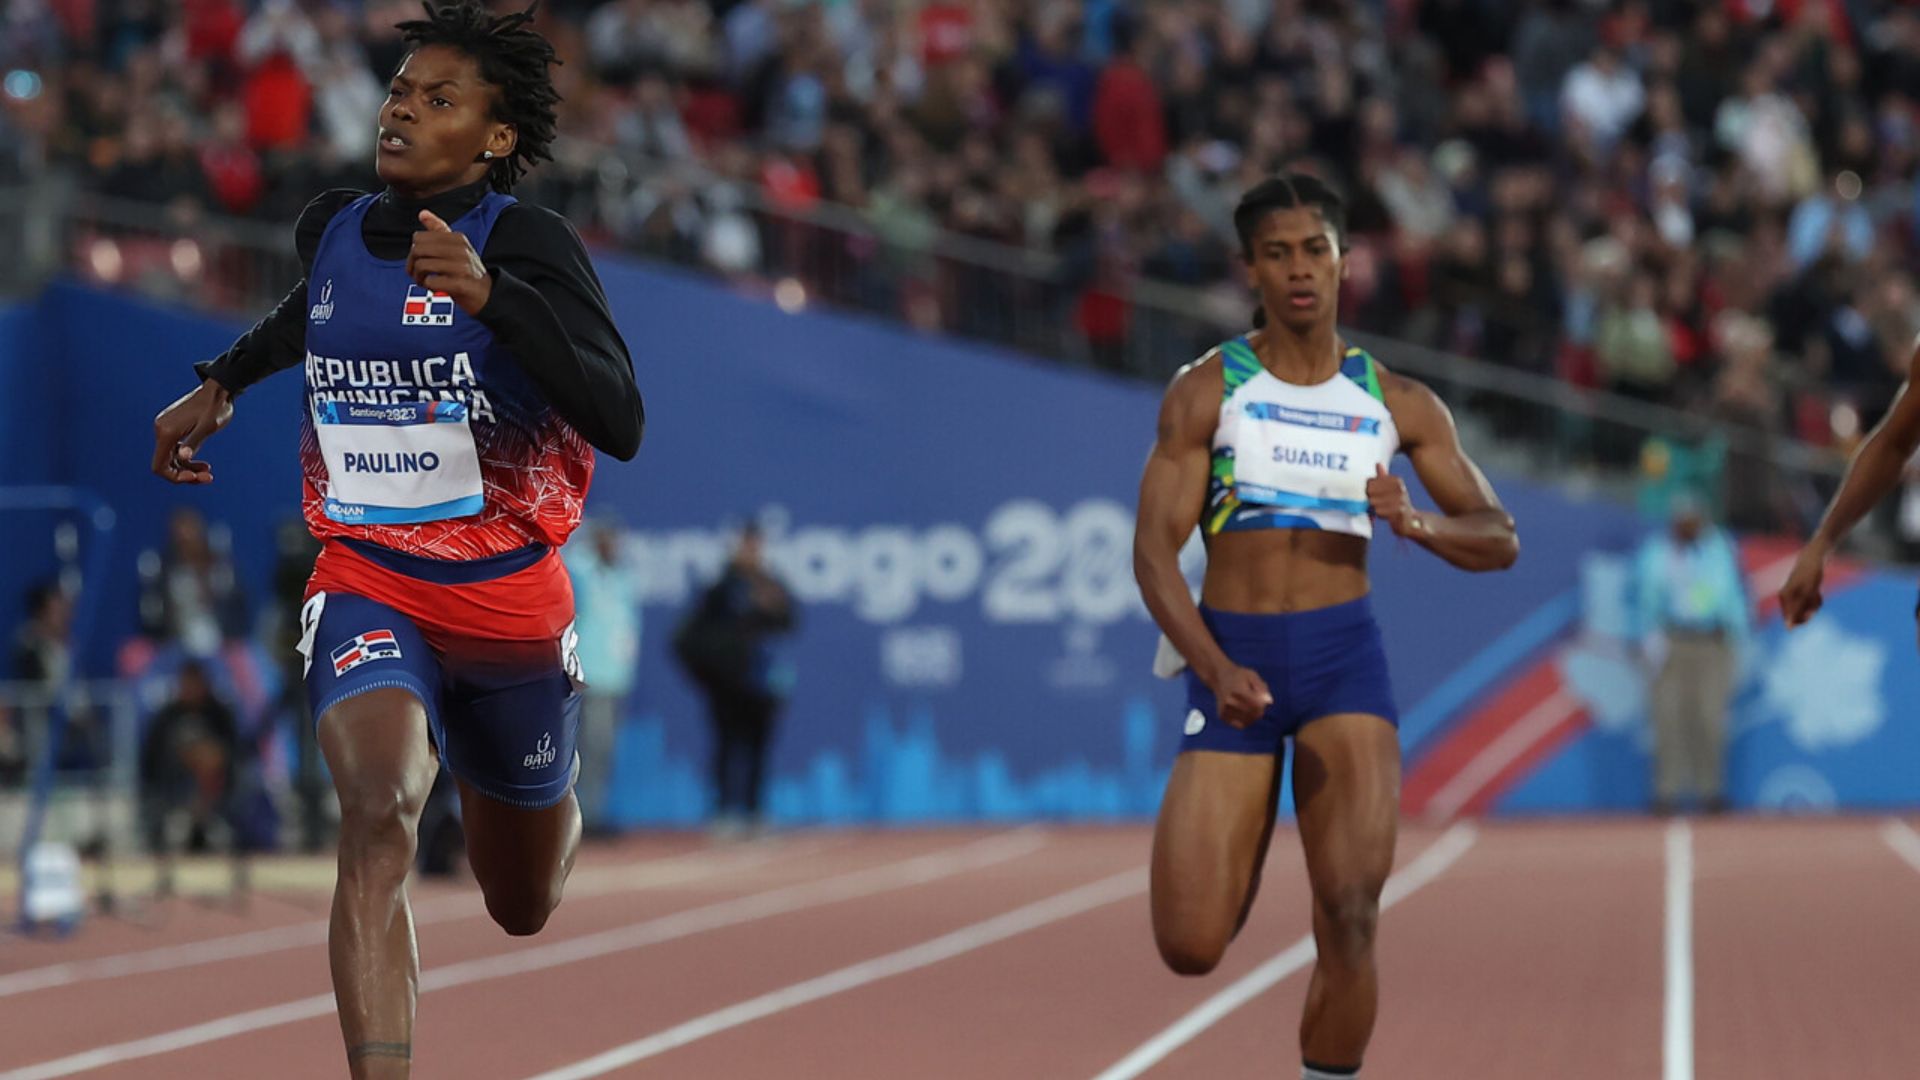 Paulino dominates the 200-Meters to secure the gold medal